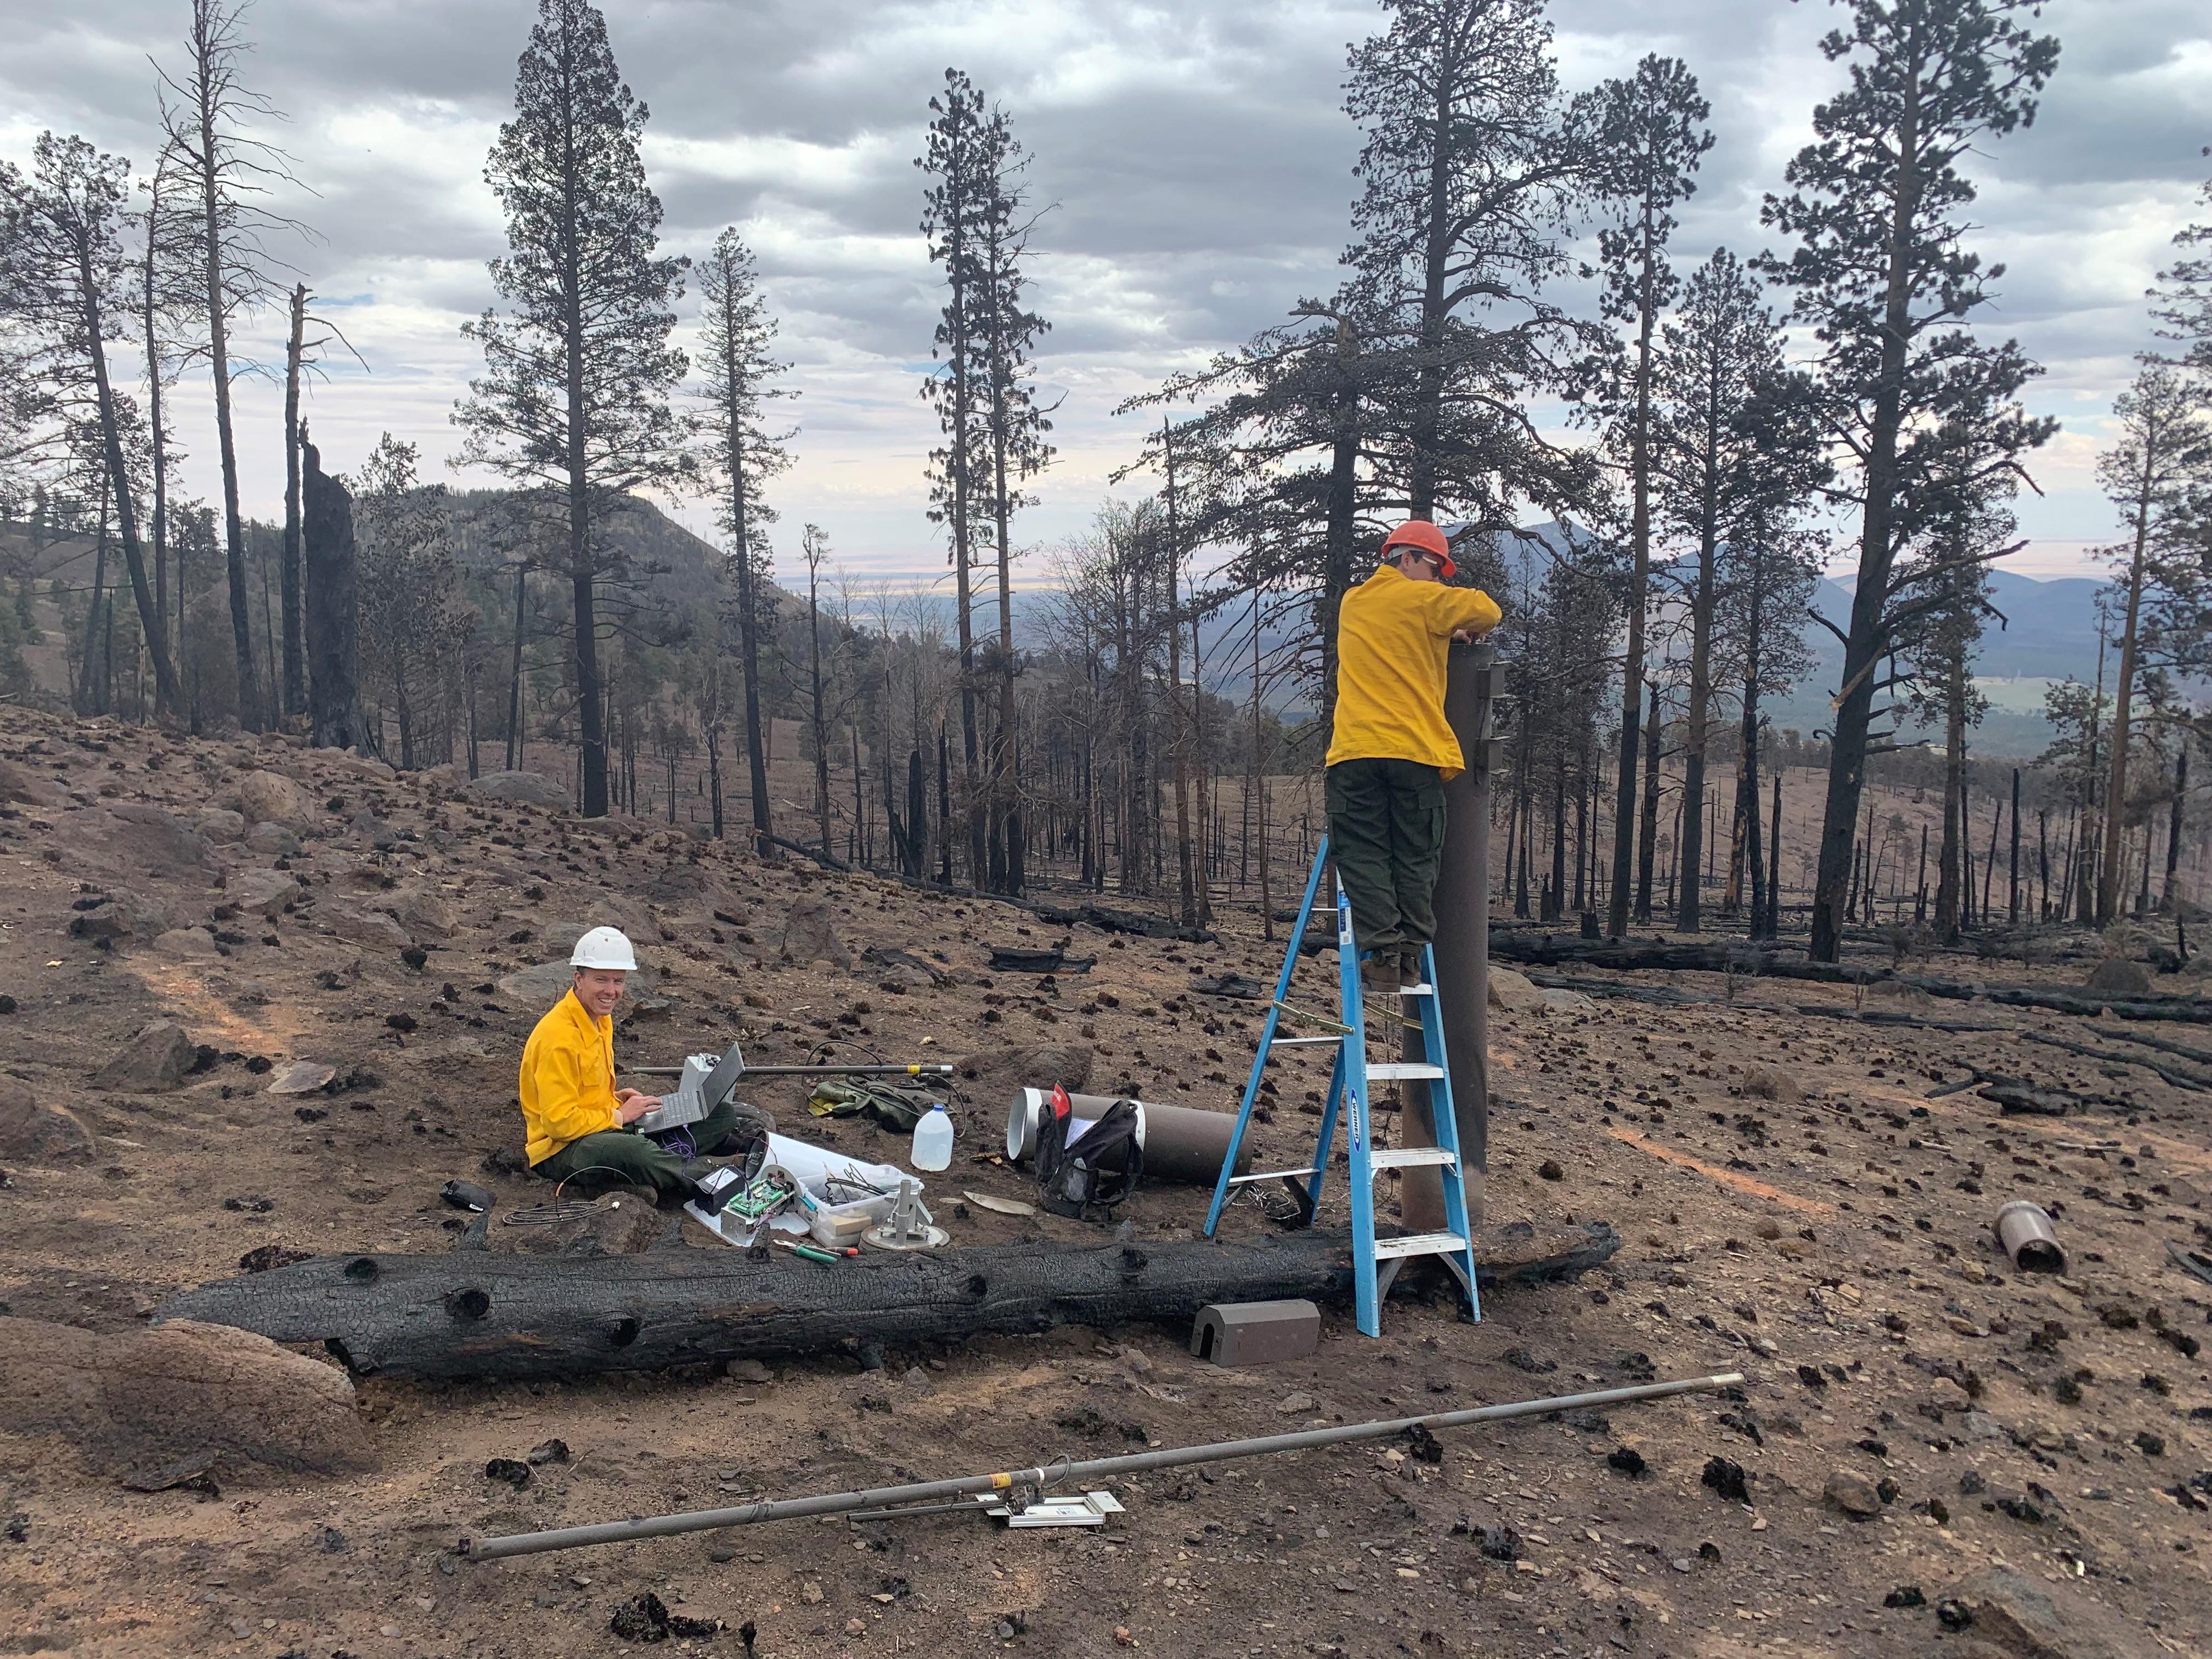 Technicians from JE Fuller Engineering and Geomorphology repair a flood warning rain gauge that was damaged by the Pipeline Fire along the Waterline Road on June 22.  Photo Kelly Mott Lacroix USFS